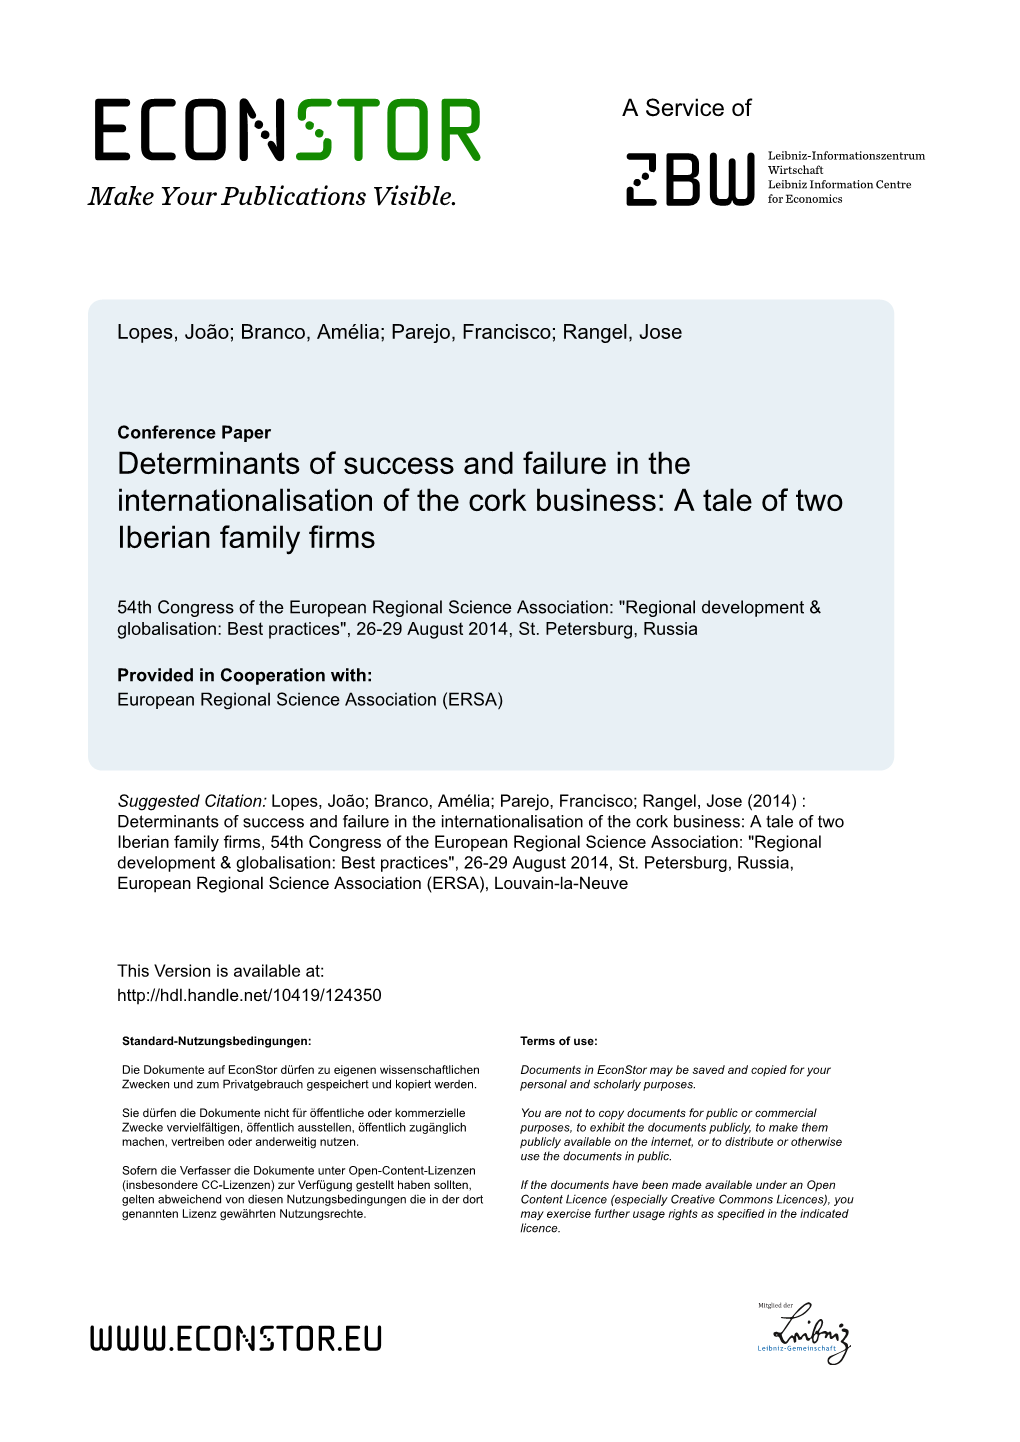 Determinants of Success and Failure in the Internationalisation of the Cork Business: a Tale of Two Iberian Family Firms